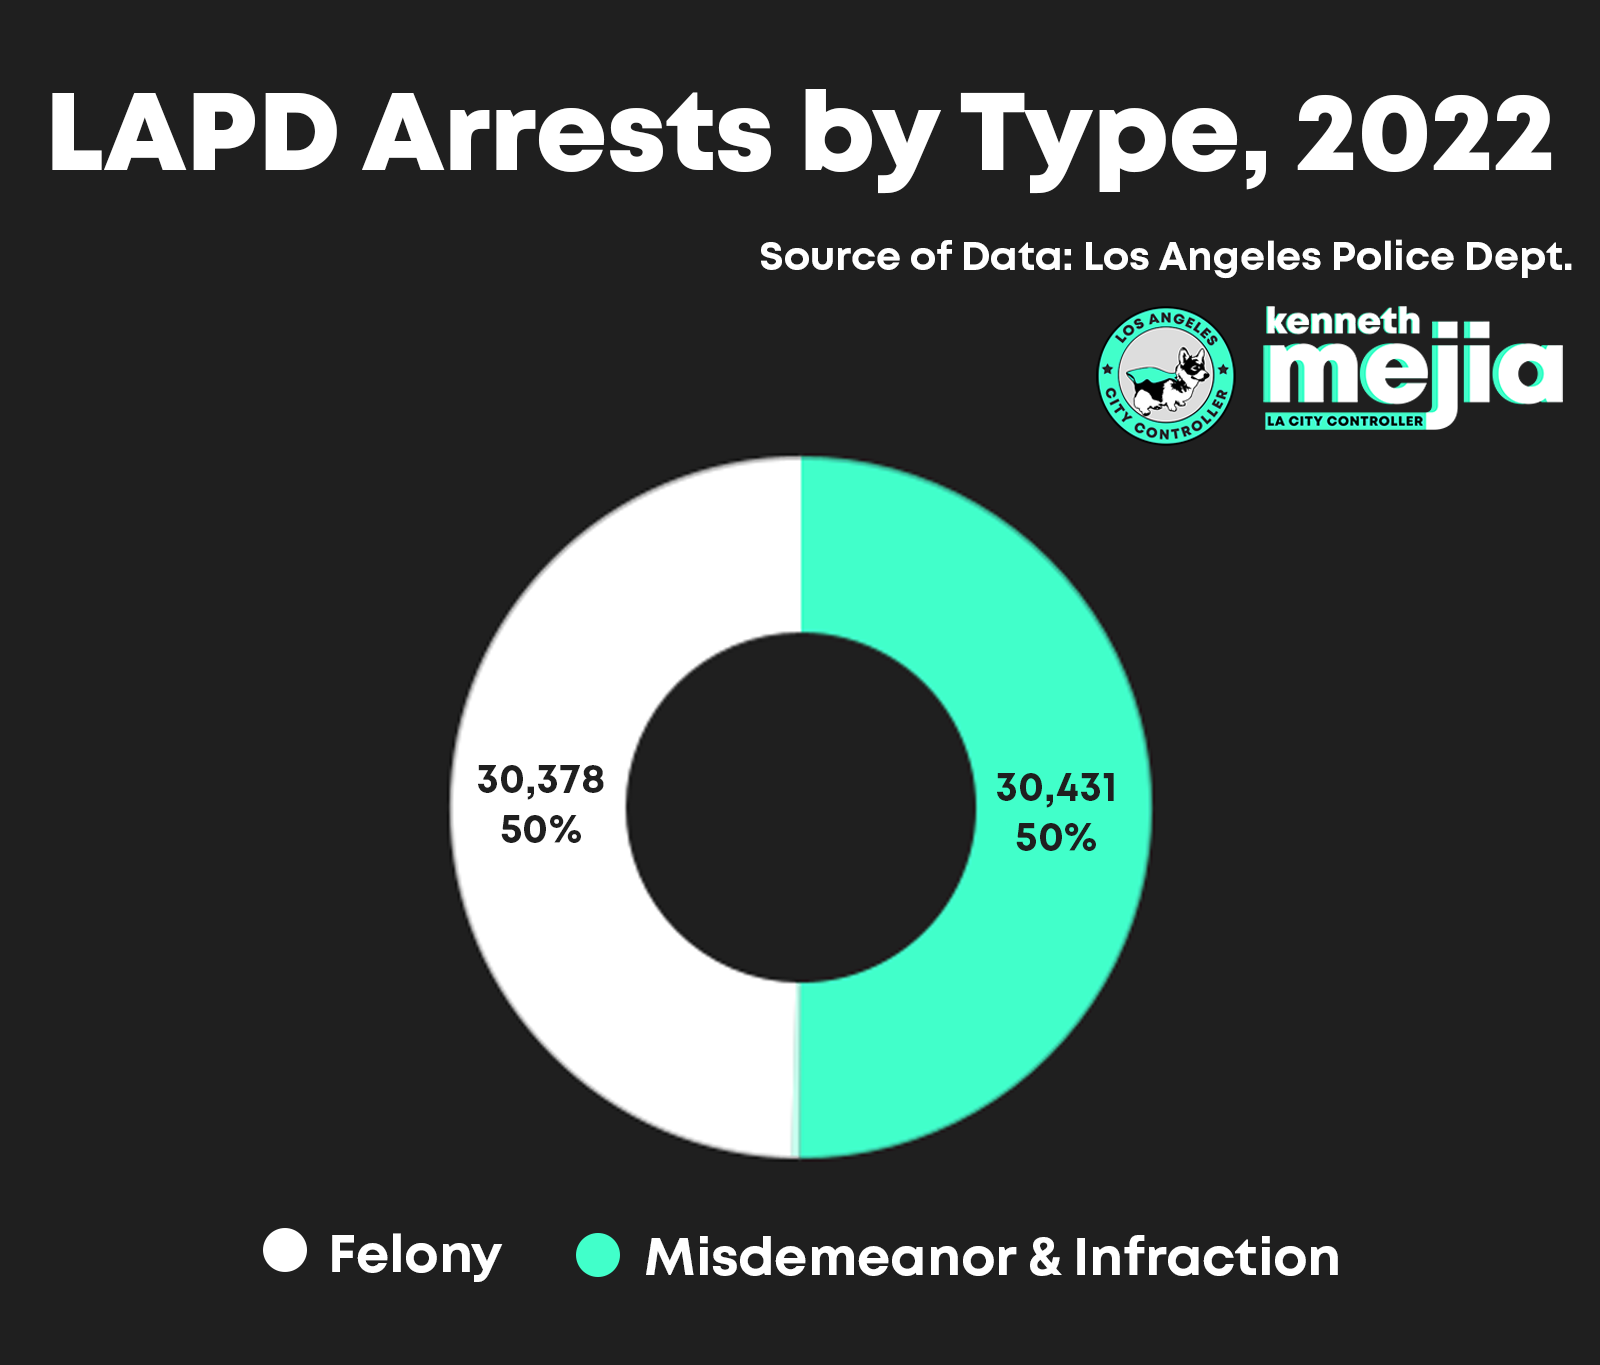 A bar chart of LAPD Arrests by Council District, 2022. There are still fewer arrests overall compared to 2019. There are 15 Council Districts. Council Districts 14, 8, and 1 have the highest number of arrests, at around 5,000 to 6,000 arrests, and are also fairly close in number of arrests to districts 6, 9, 11, and 13 which are also close to 5,000 arrests. The rest of the Council Districts havemuch fewer than 5,000 arrests. CDs 4 and 5 have the fewest number of arrests, at under 2,500 arrests each. Source of data is LAPD. 